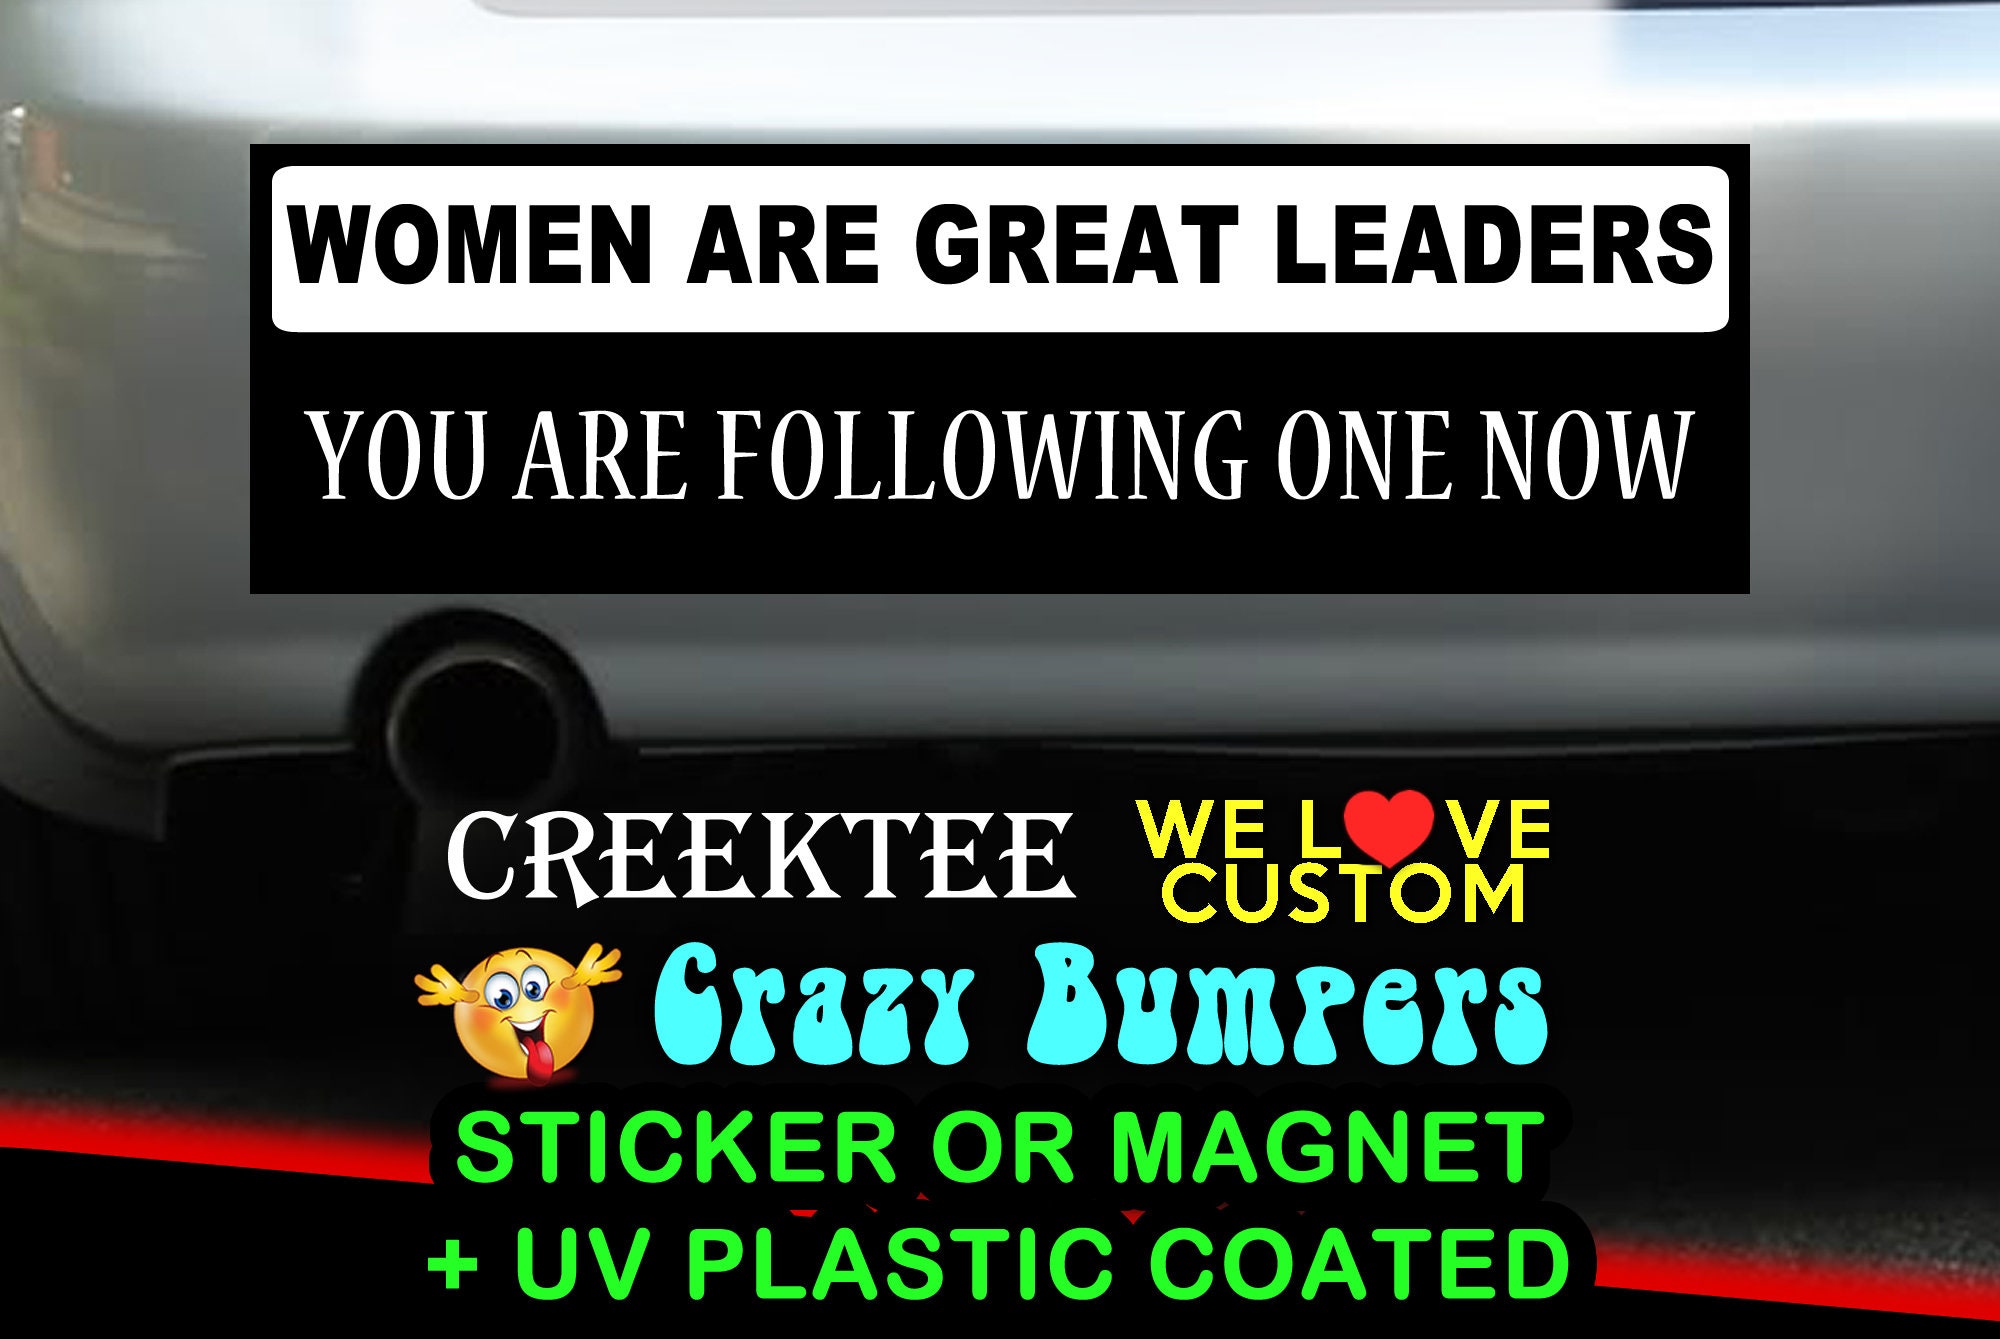 Women Are Great Leaders You Are Following One Now 9 x 2.7 or 10 x 3 Sticker Magnet or bumper sticker or bumper magnet